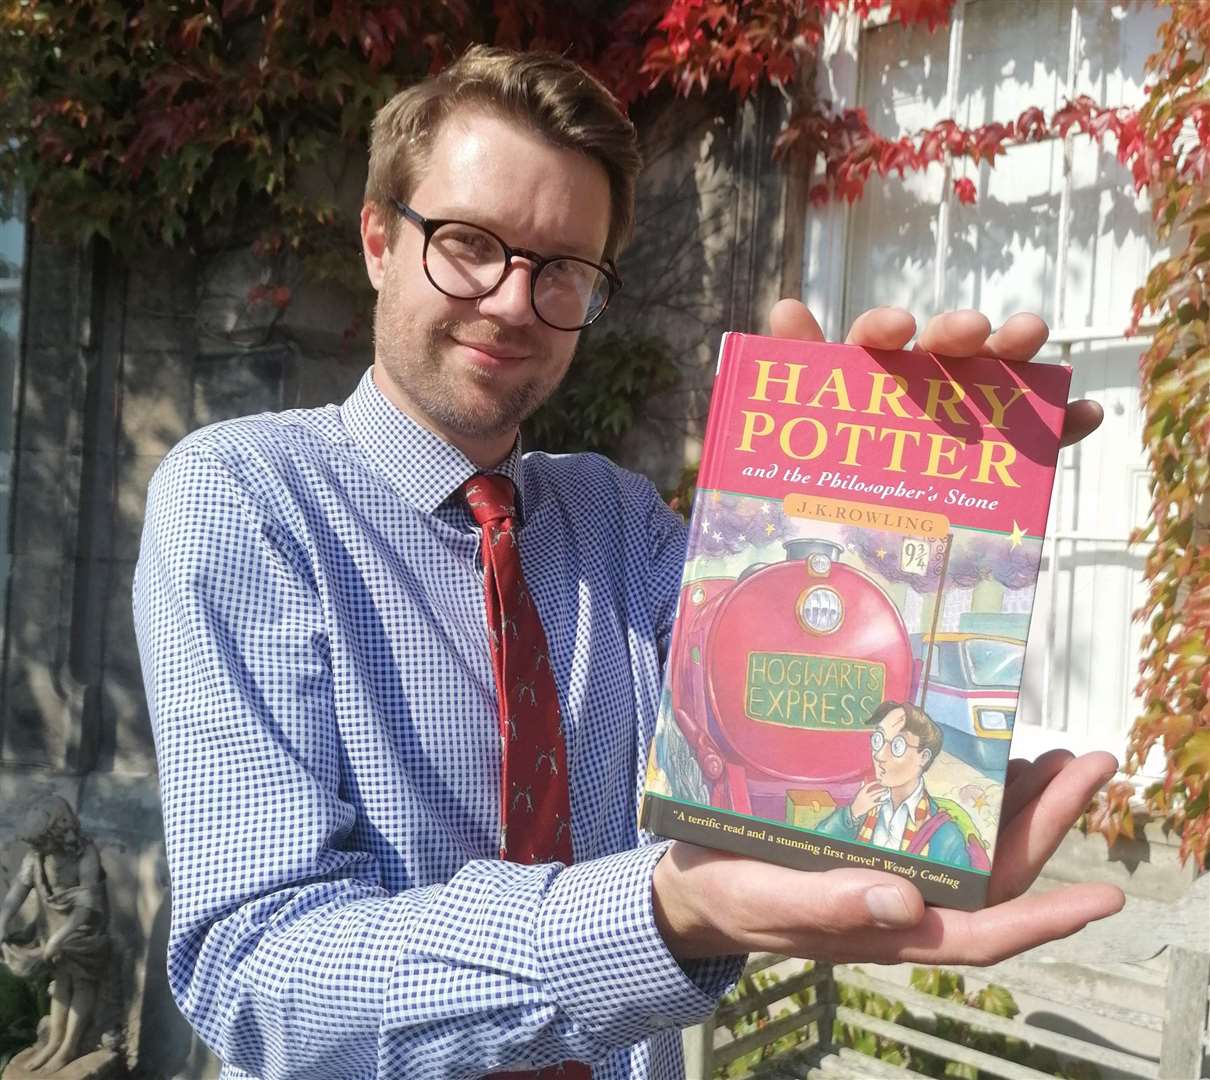 Hansons’ Jim Spencer holding the rare first edition Harry Potter book, which has sold for £75,000 (Hansons/PA)